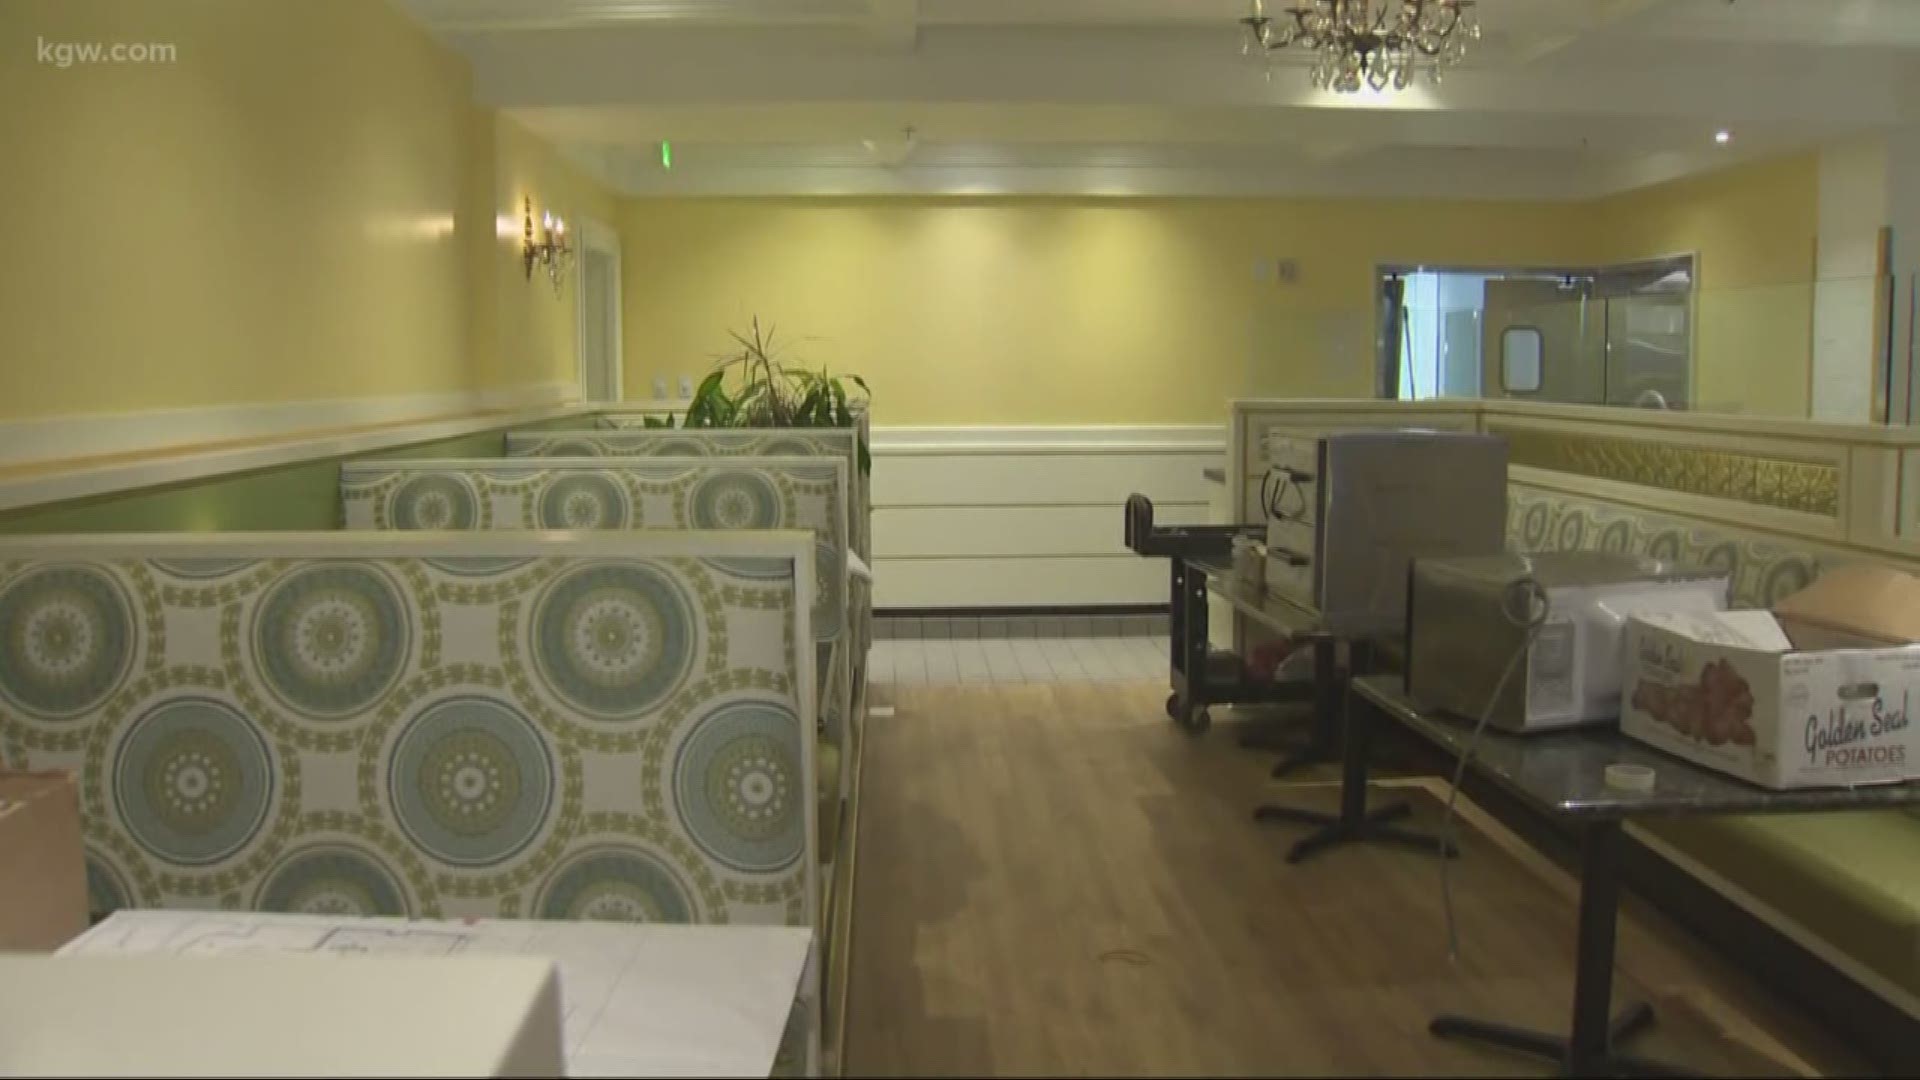 Mother's Bistro is moving to a brand new location, with a bigger kitchen, and a bakery where you can watch them bake biscuits while you eat. The mother herself, Lisa Schroeder, gave Cassidy Quinn a tour of the new space. www.mothersbistro.com